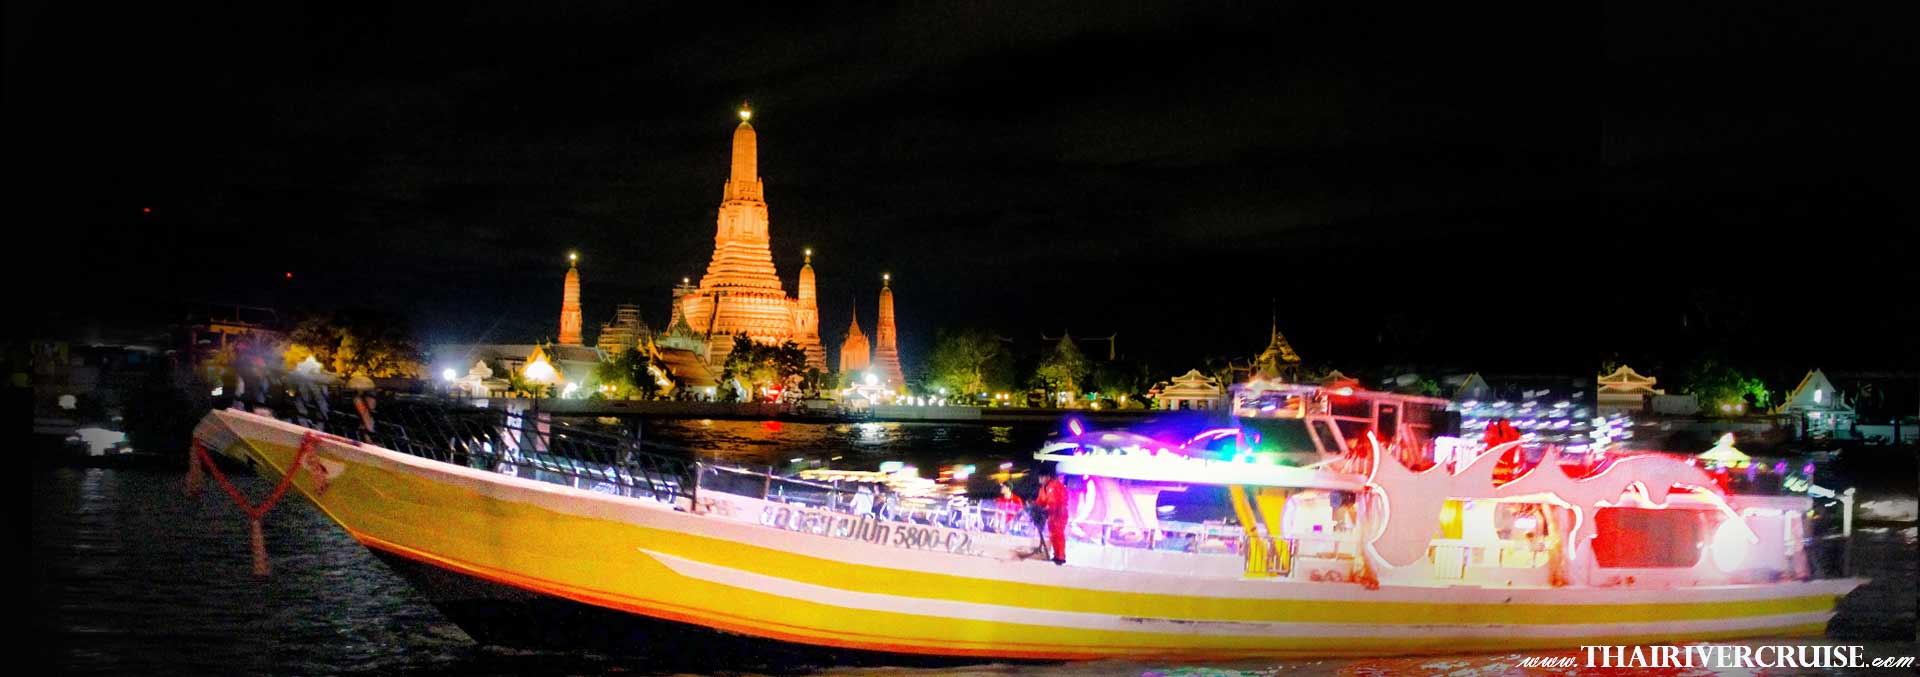 Cruise private Bangkok,Best Sundown Party Boat Chao Phraya river Bangkok,Thailand. Private Cocktail Cruise Bangkok Sunset Night Party Boat including free flow drinks snack buffet  